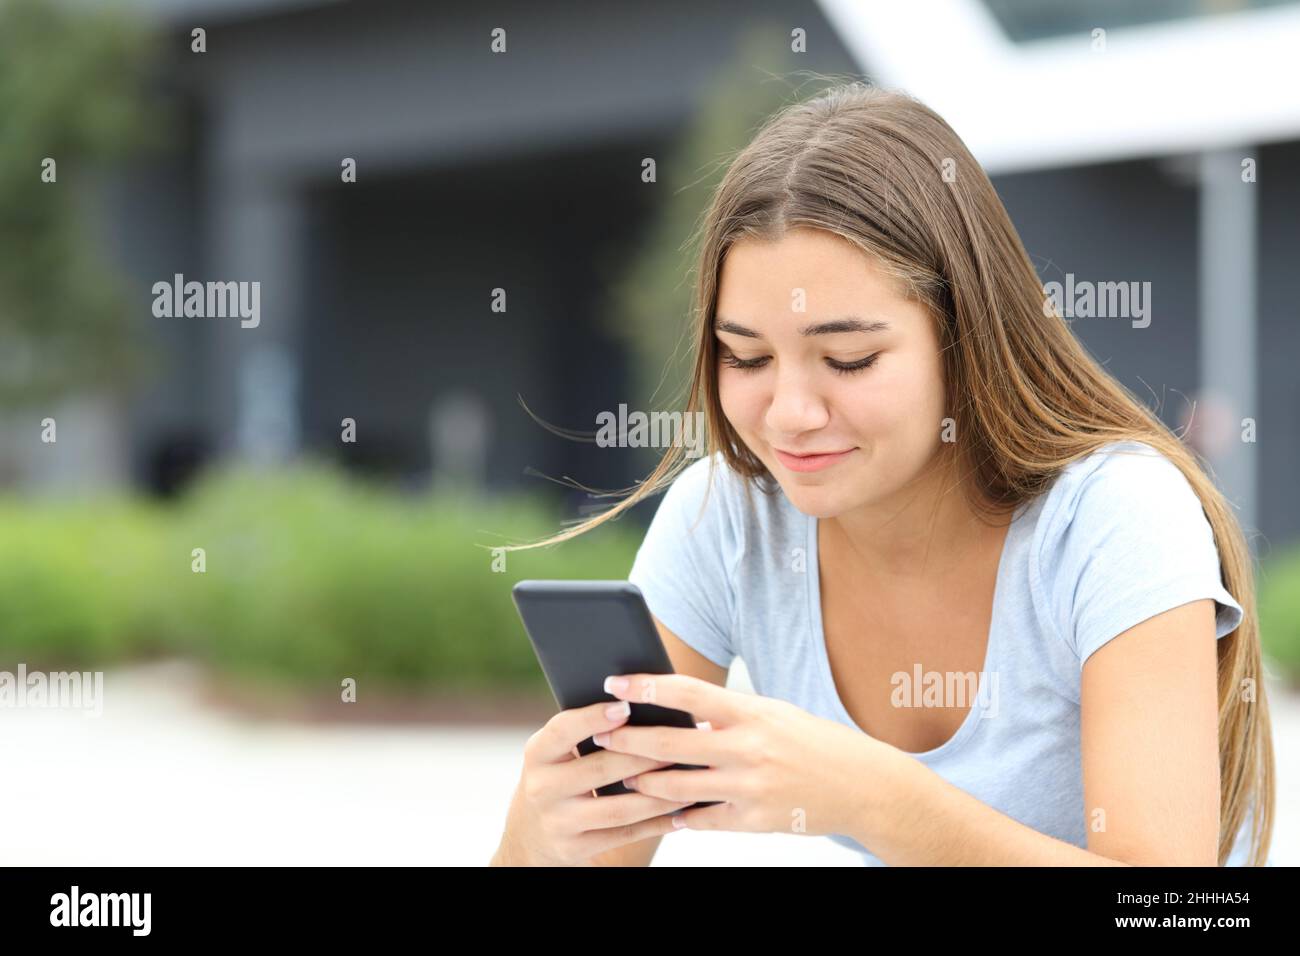 Teenage female checking smart phone sitting alone in the street Stock Photo